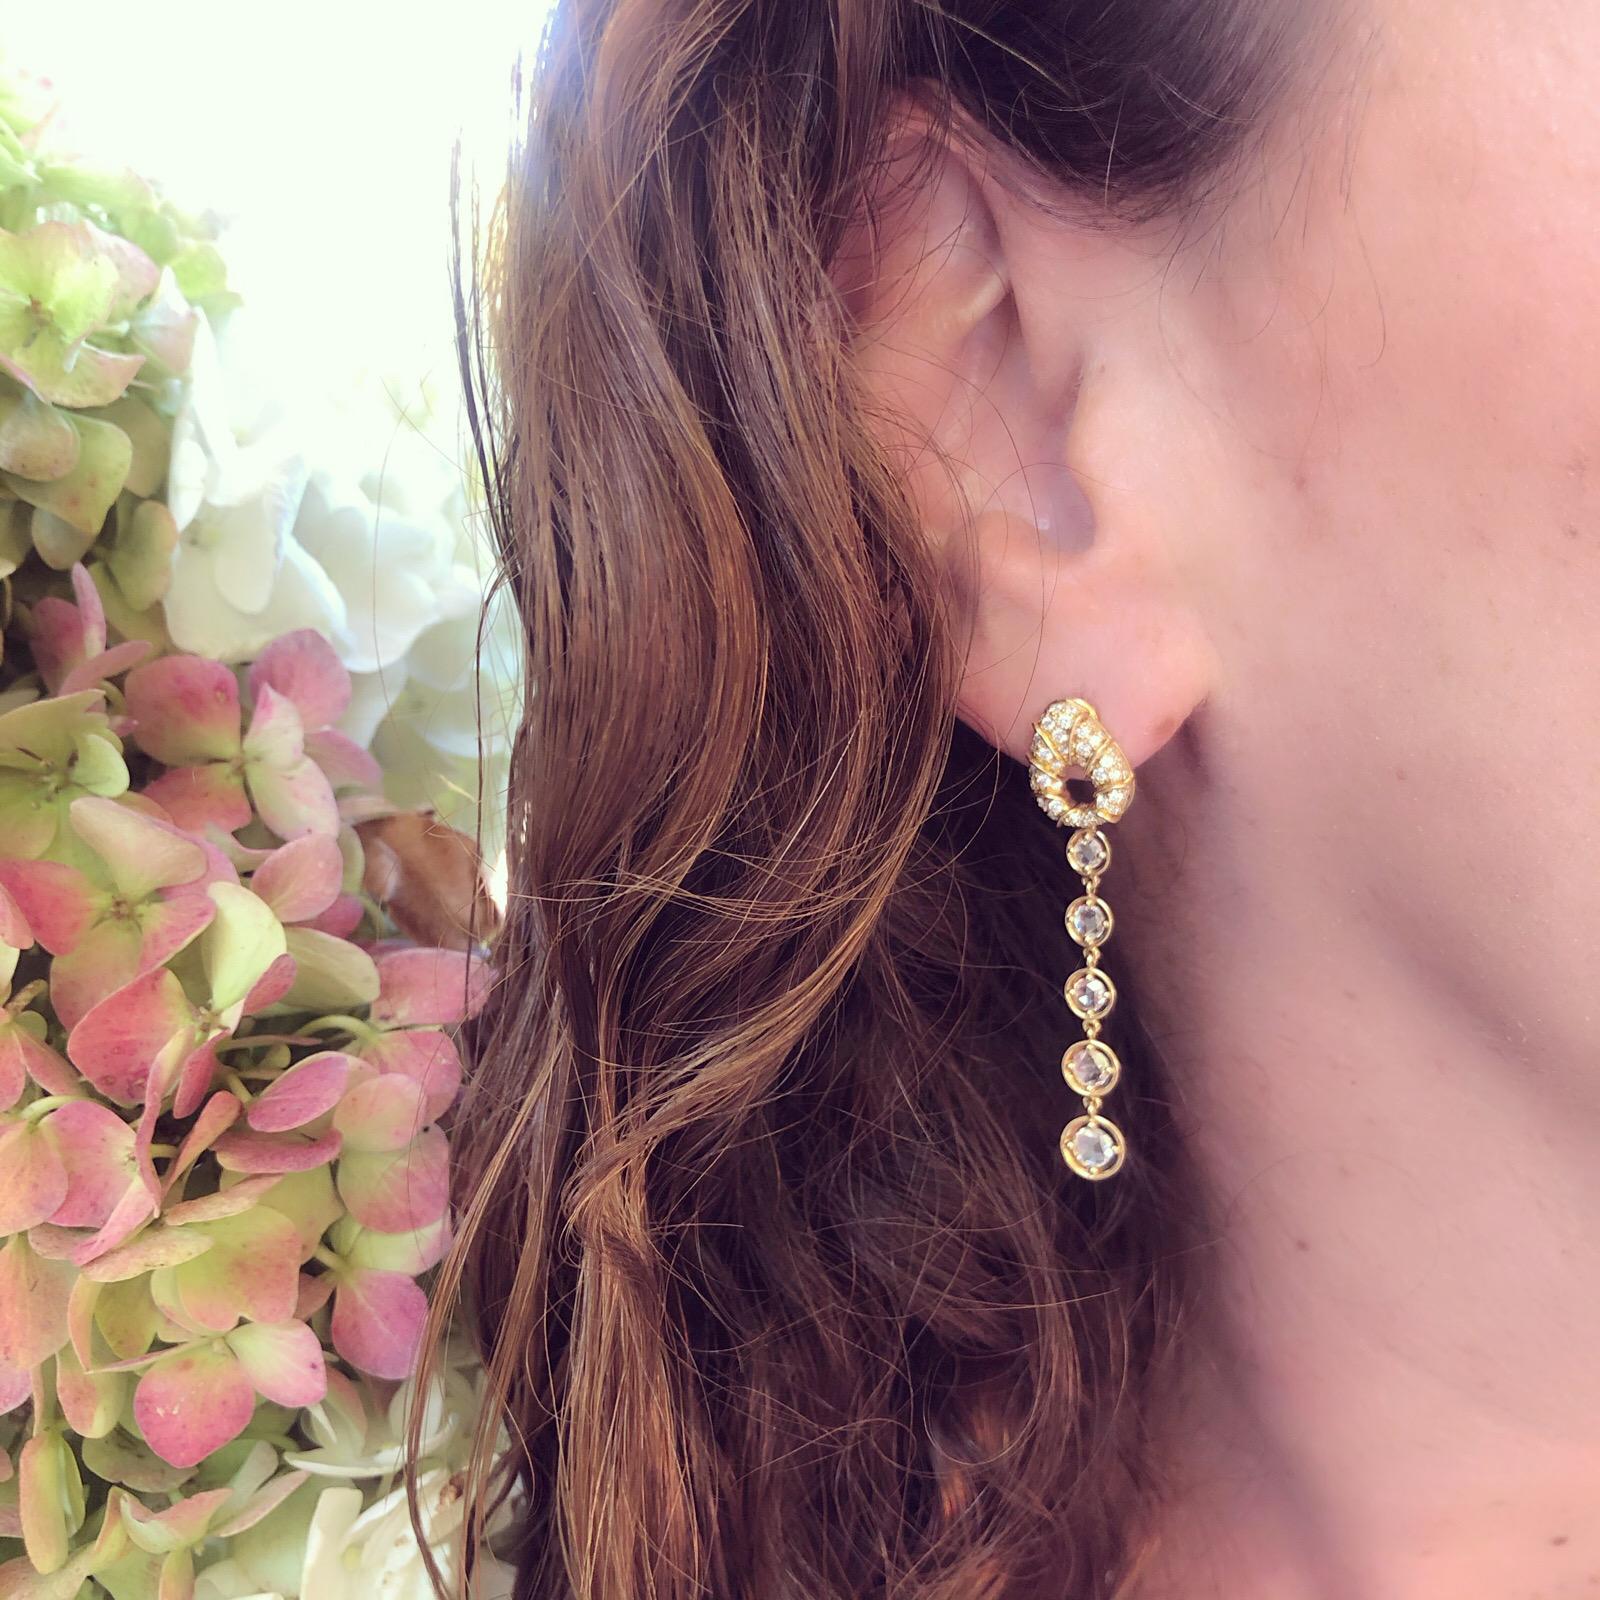 These elegant drop earrings will become your new go-to pair! By Marina B. of the famed Bulgari family, the 18k gold drops are designed with round brilliant-cut diamond pave tops, suspending rose-cut diamond links, with a total diamond weight of 1.74